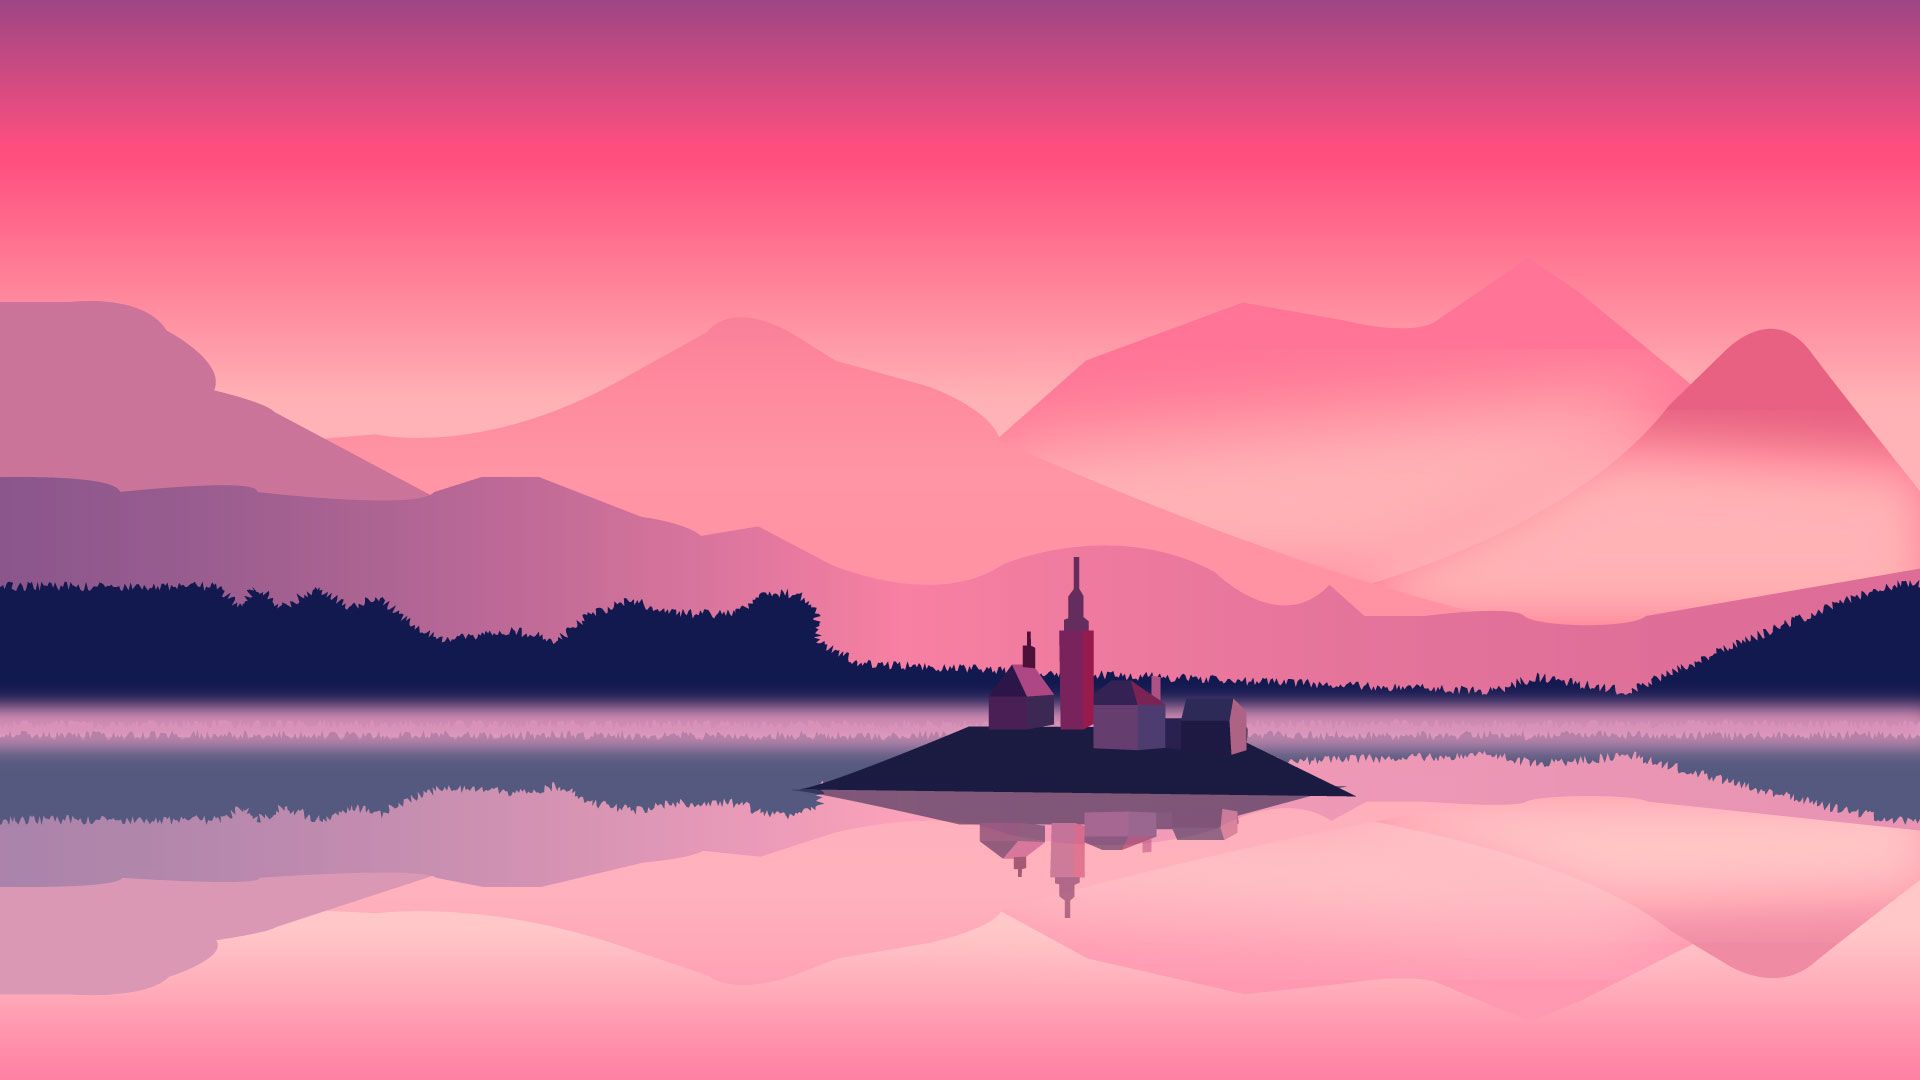 A castle on an island in the middle of water - Landscape